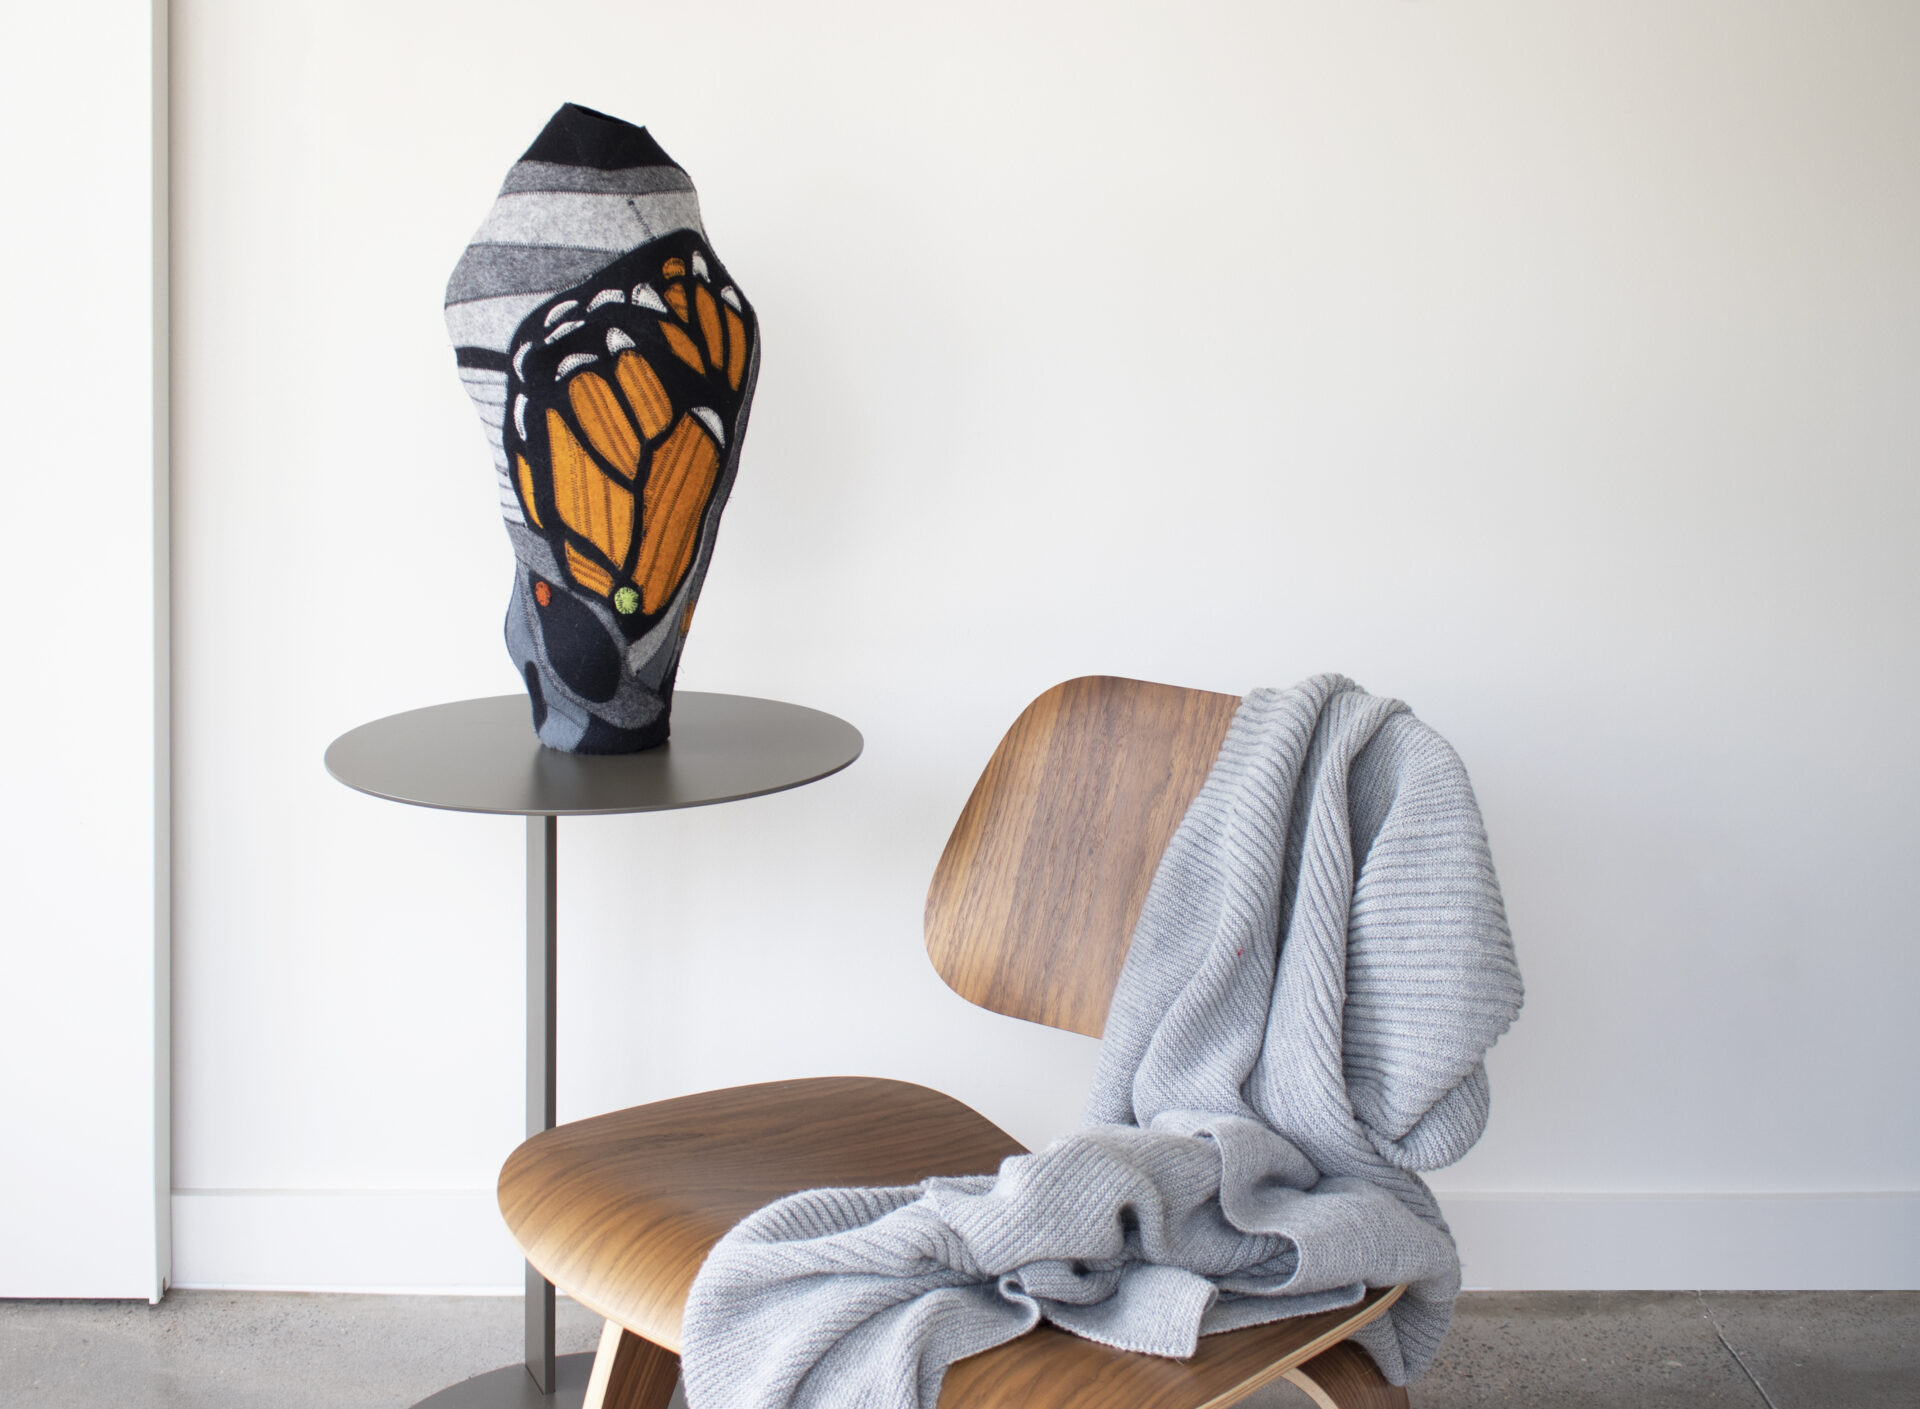 a colorful vase made of wool felt featuring the pattern of a monarch butterfly wing sits on a table beside a bent plywood chair